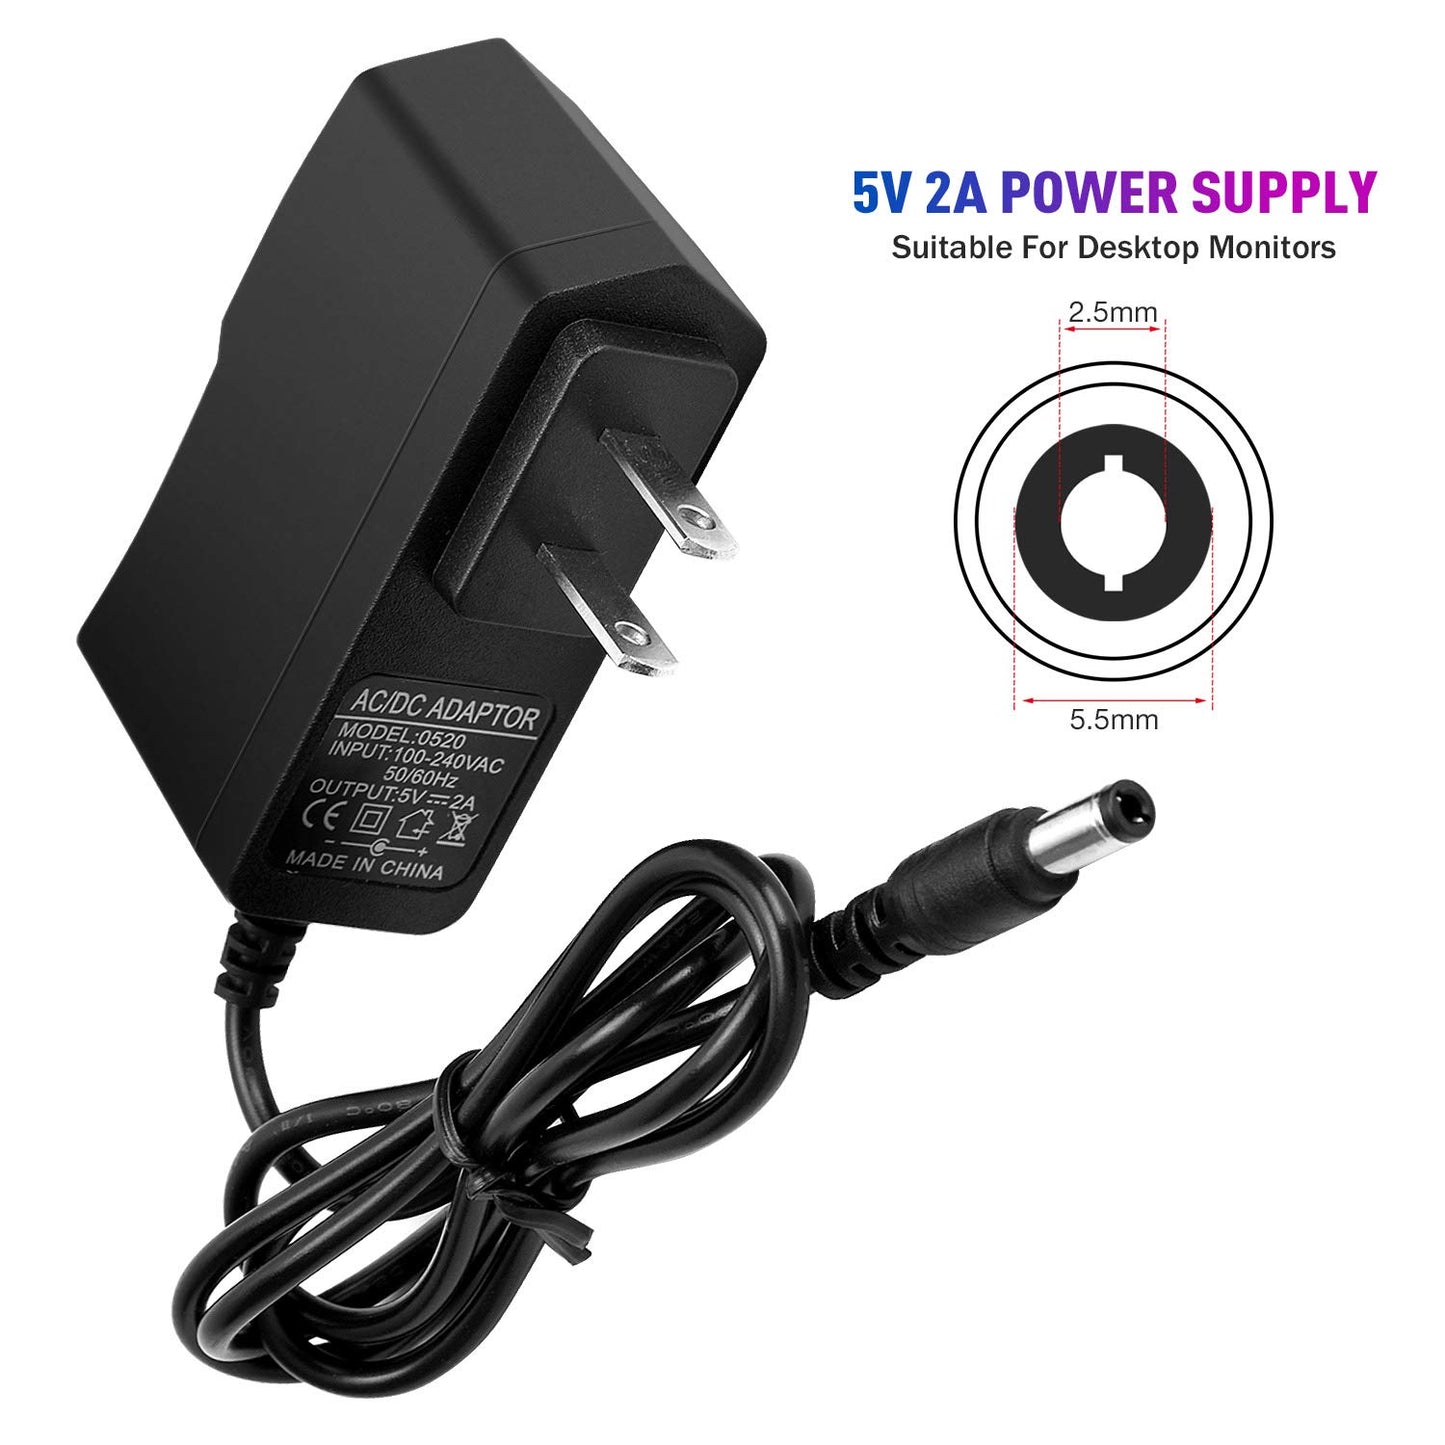 2 Pack DC 5V 2A Power Adapter, AC 100-240V to DC 5Volt Transformers, Power Supply for 2.1mm X 5.5mm US Plug